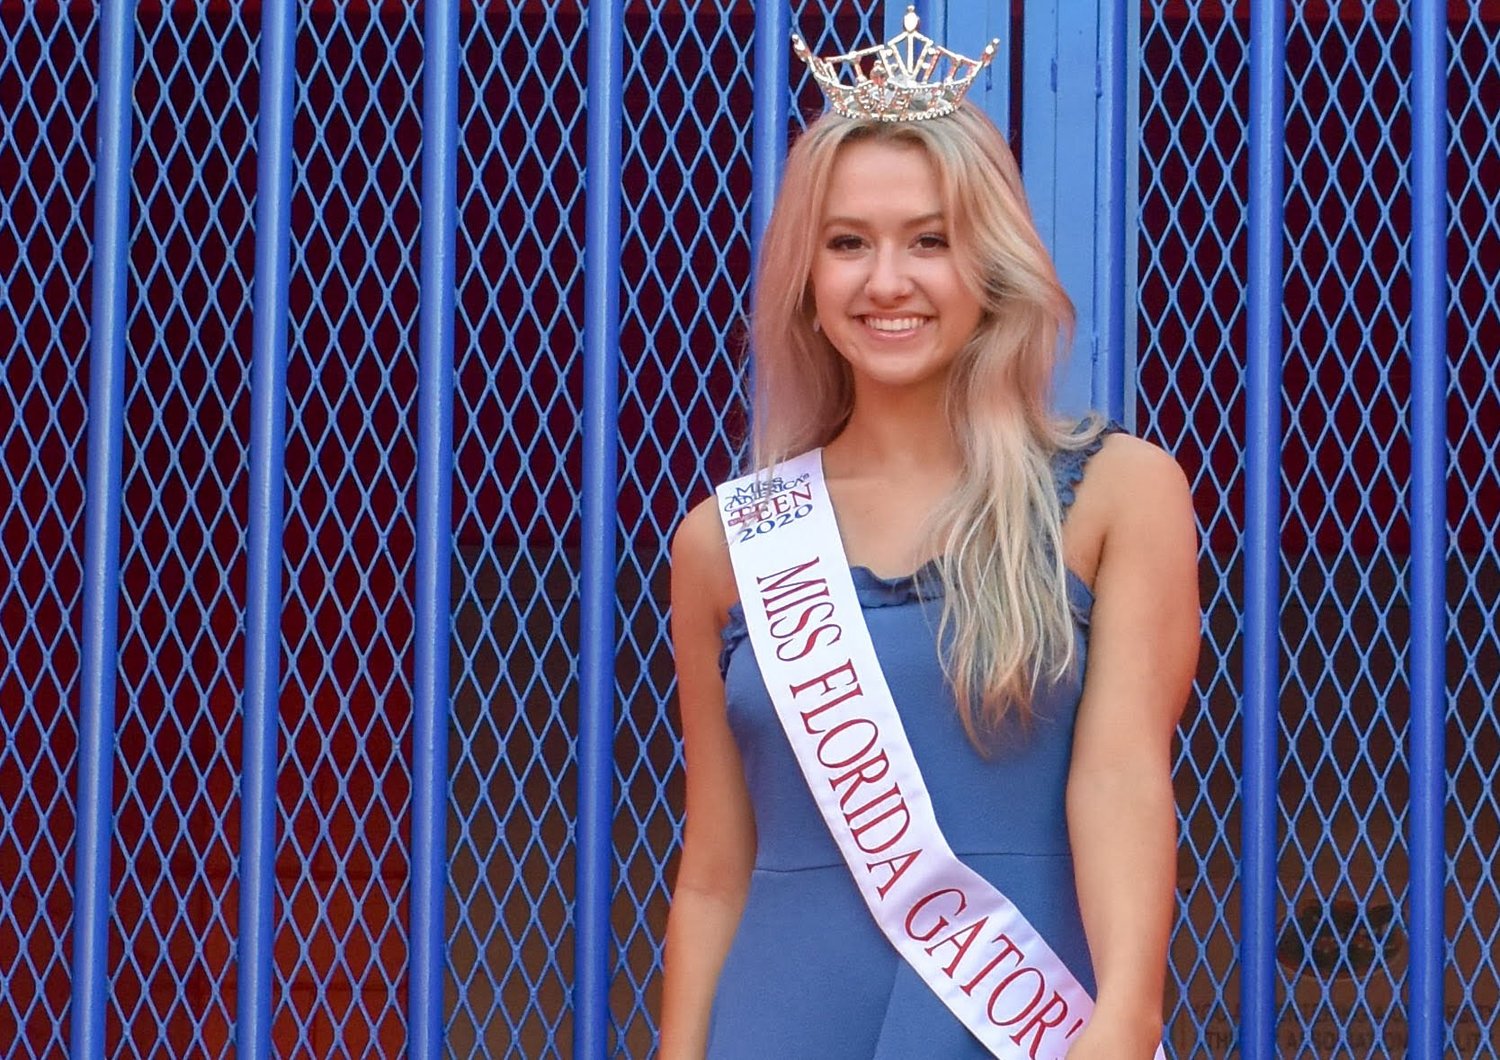 Amelia McDonough, a freshman at PVHS, won the crown of Miss Florida Gator’s Outstanding Teen just before the pandemic struck.